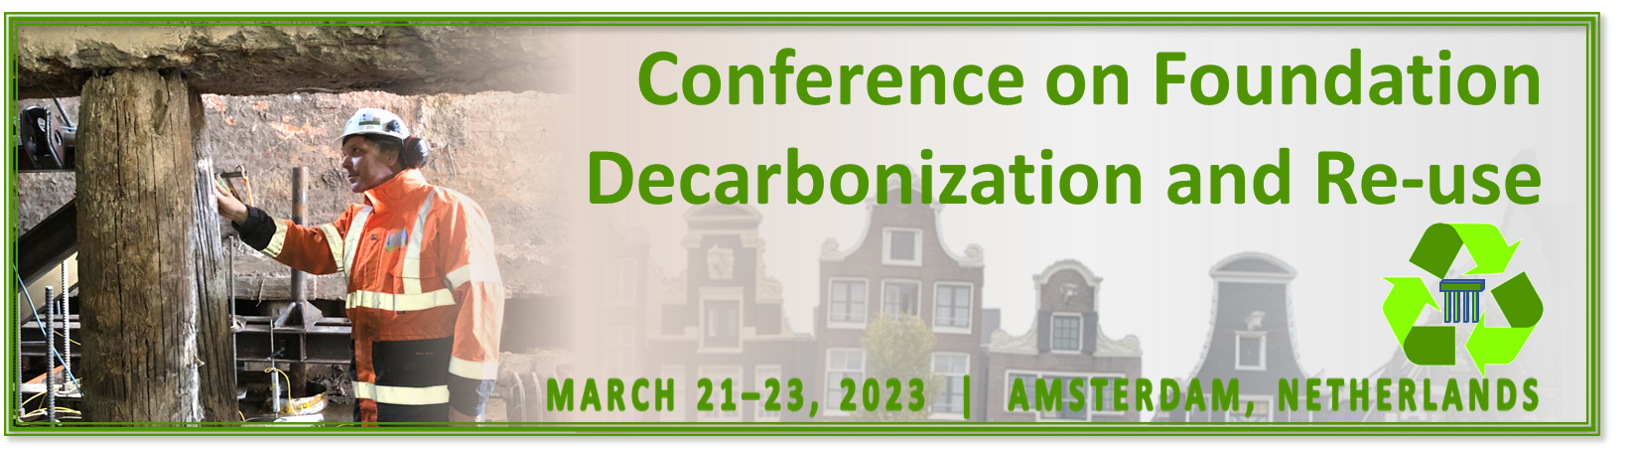 Conference on Foundation Decarbonization and Re-use